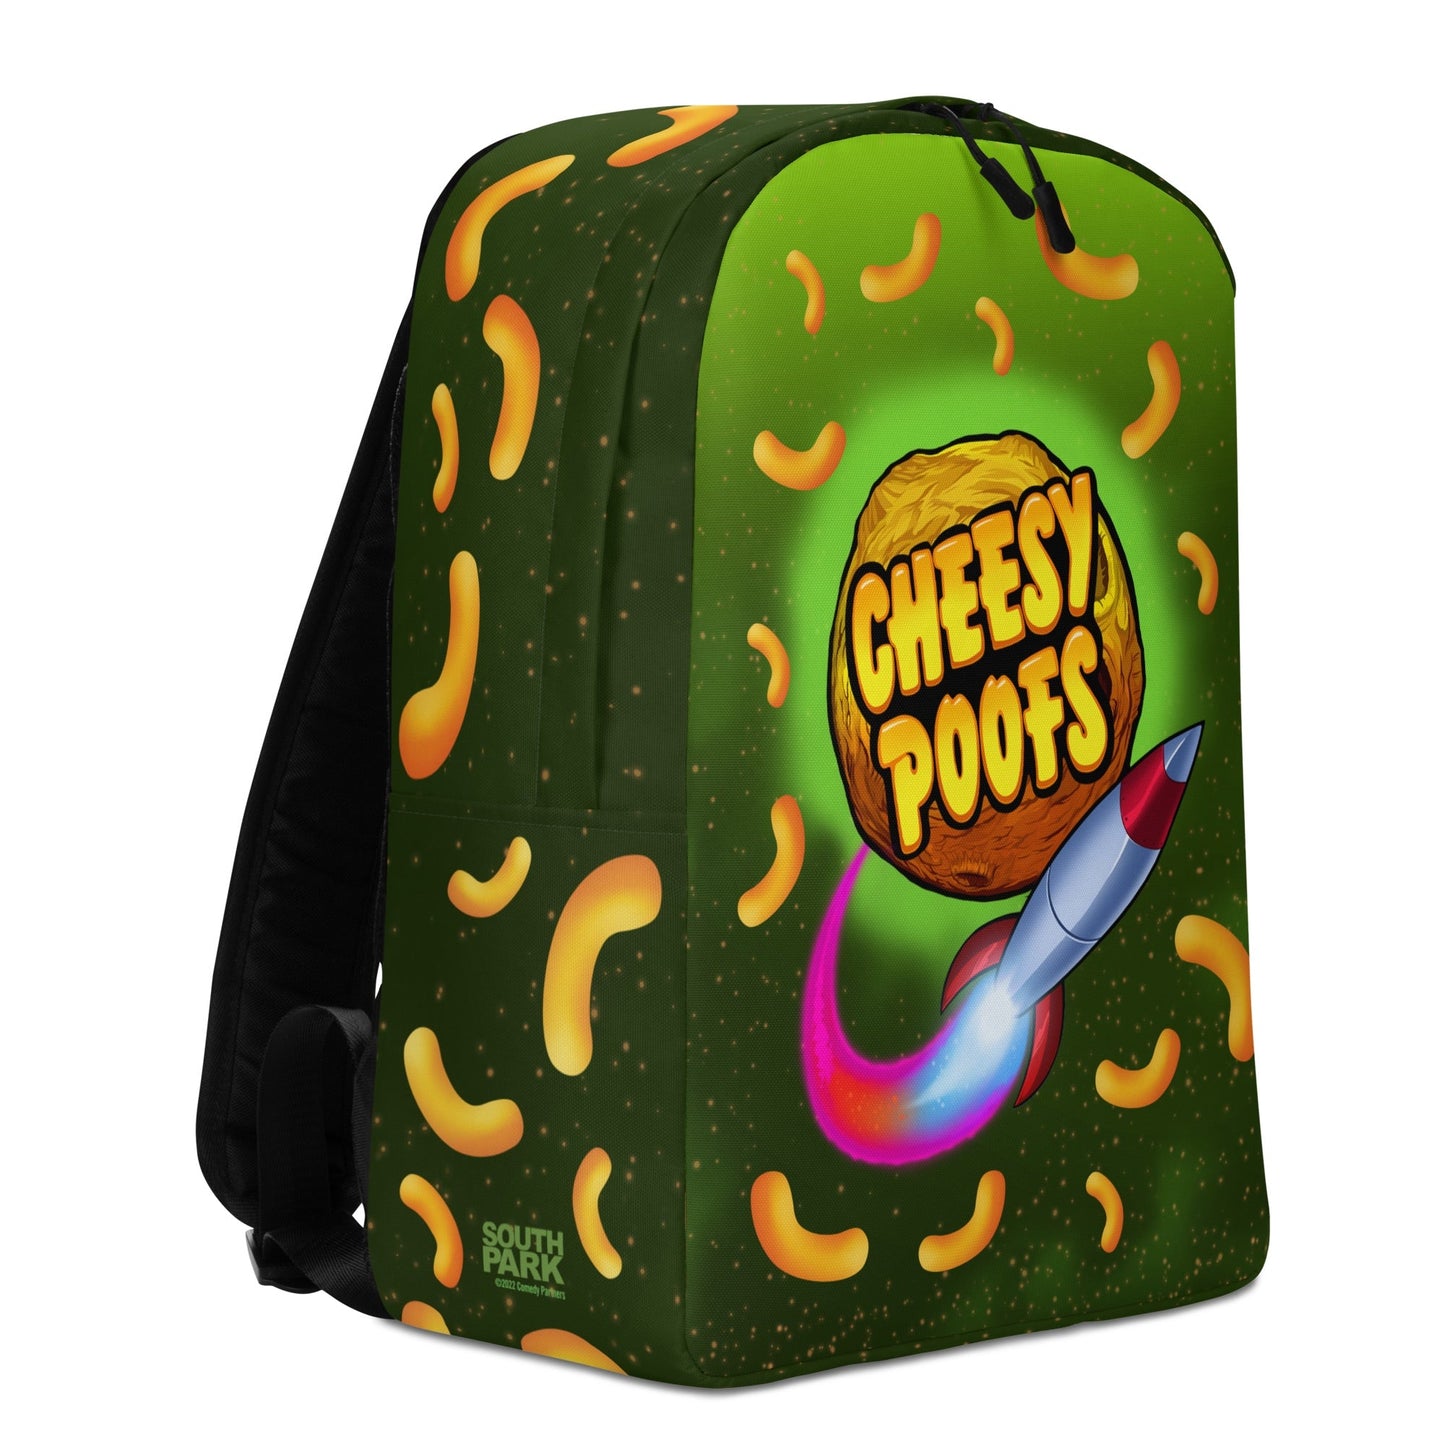 South Park Cheesy Poofs Backpack - Paramount Shop